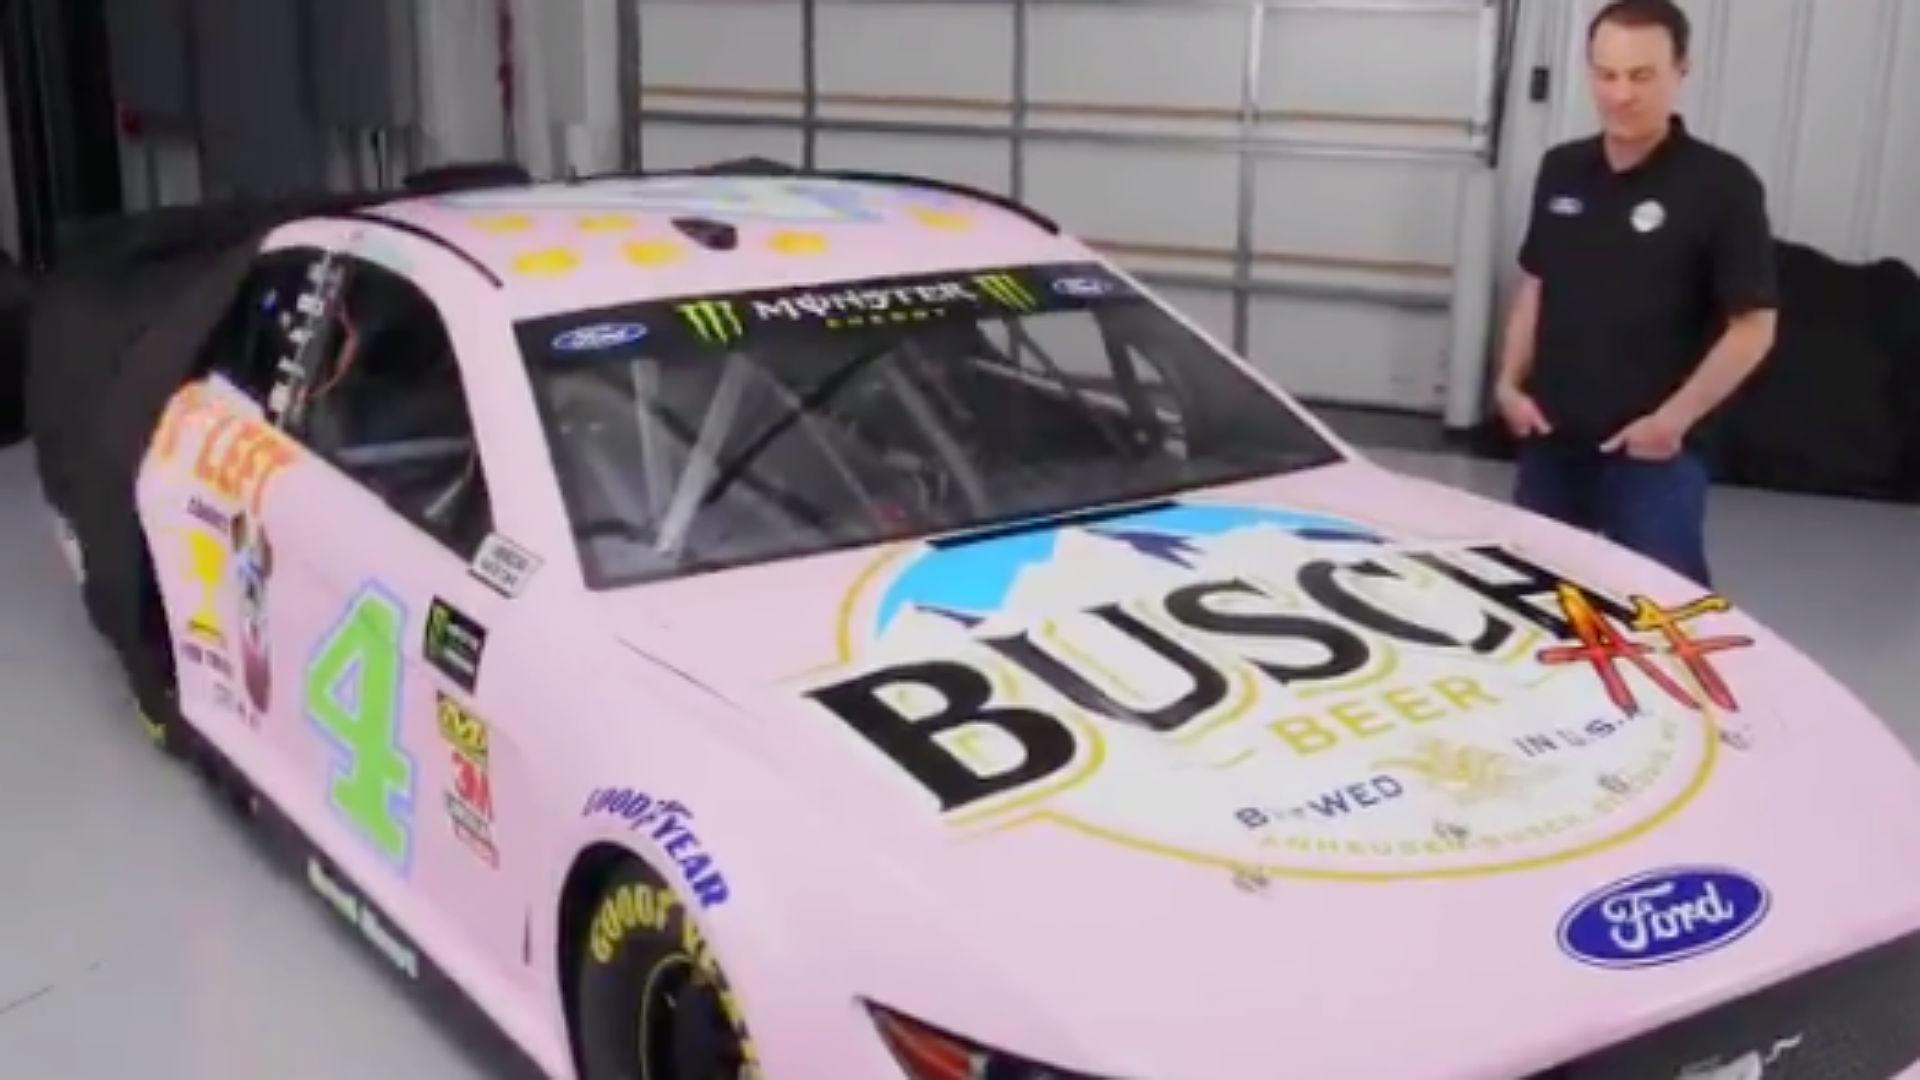 Kevin Harvick really hates his 'millennial' themed car for All-Star race